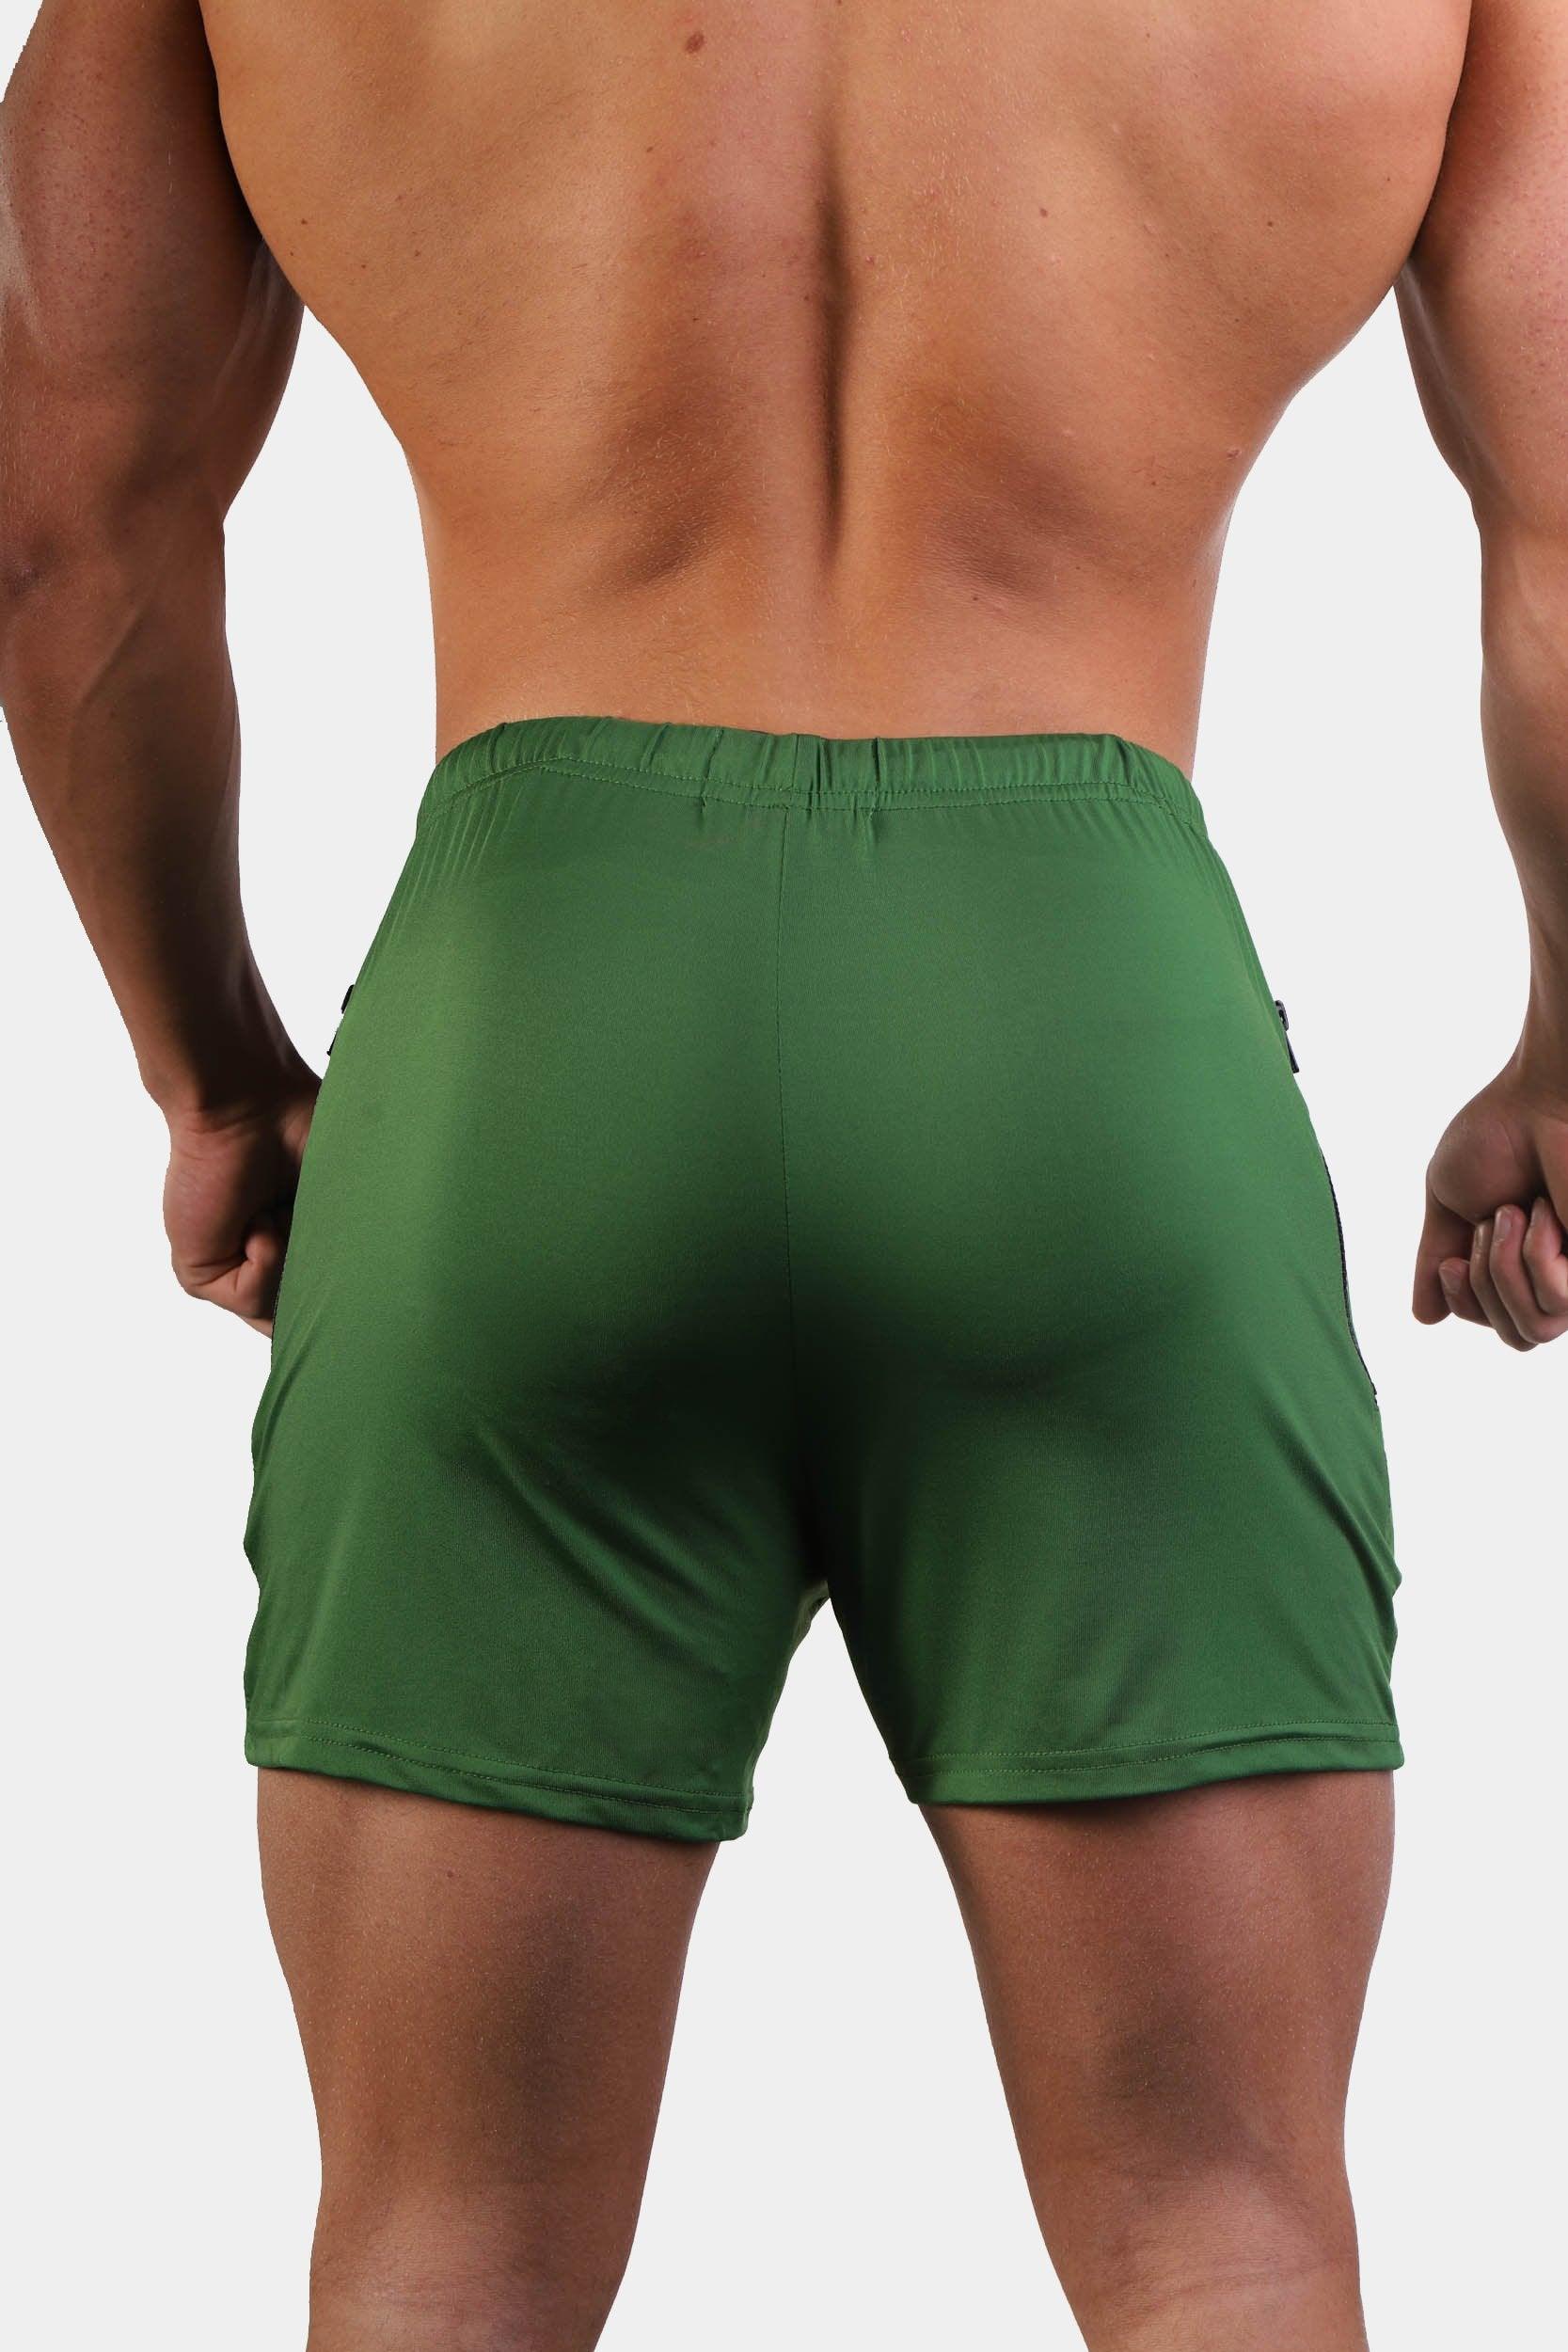 Jed North Men's Fitted 4 Shorts Bodybuilding Nigeria | Ubuy